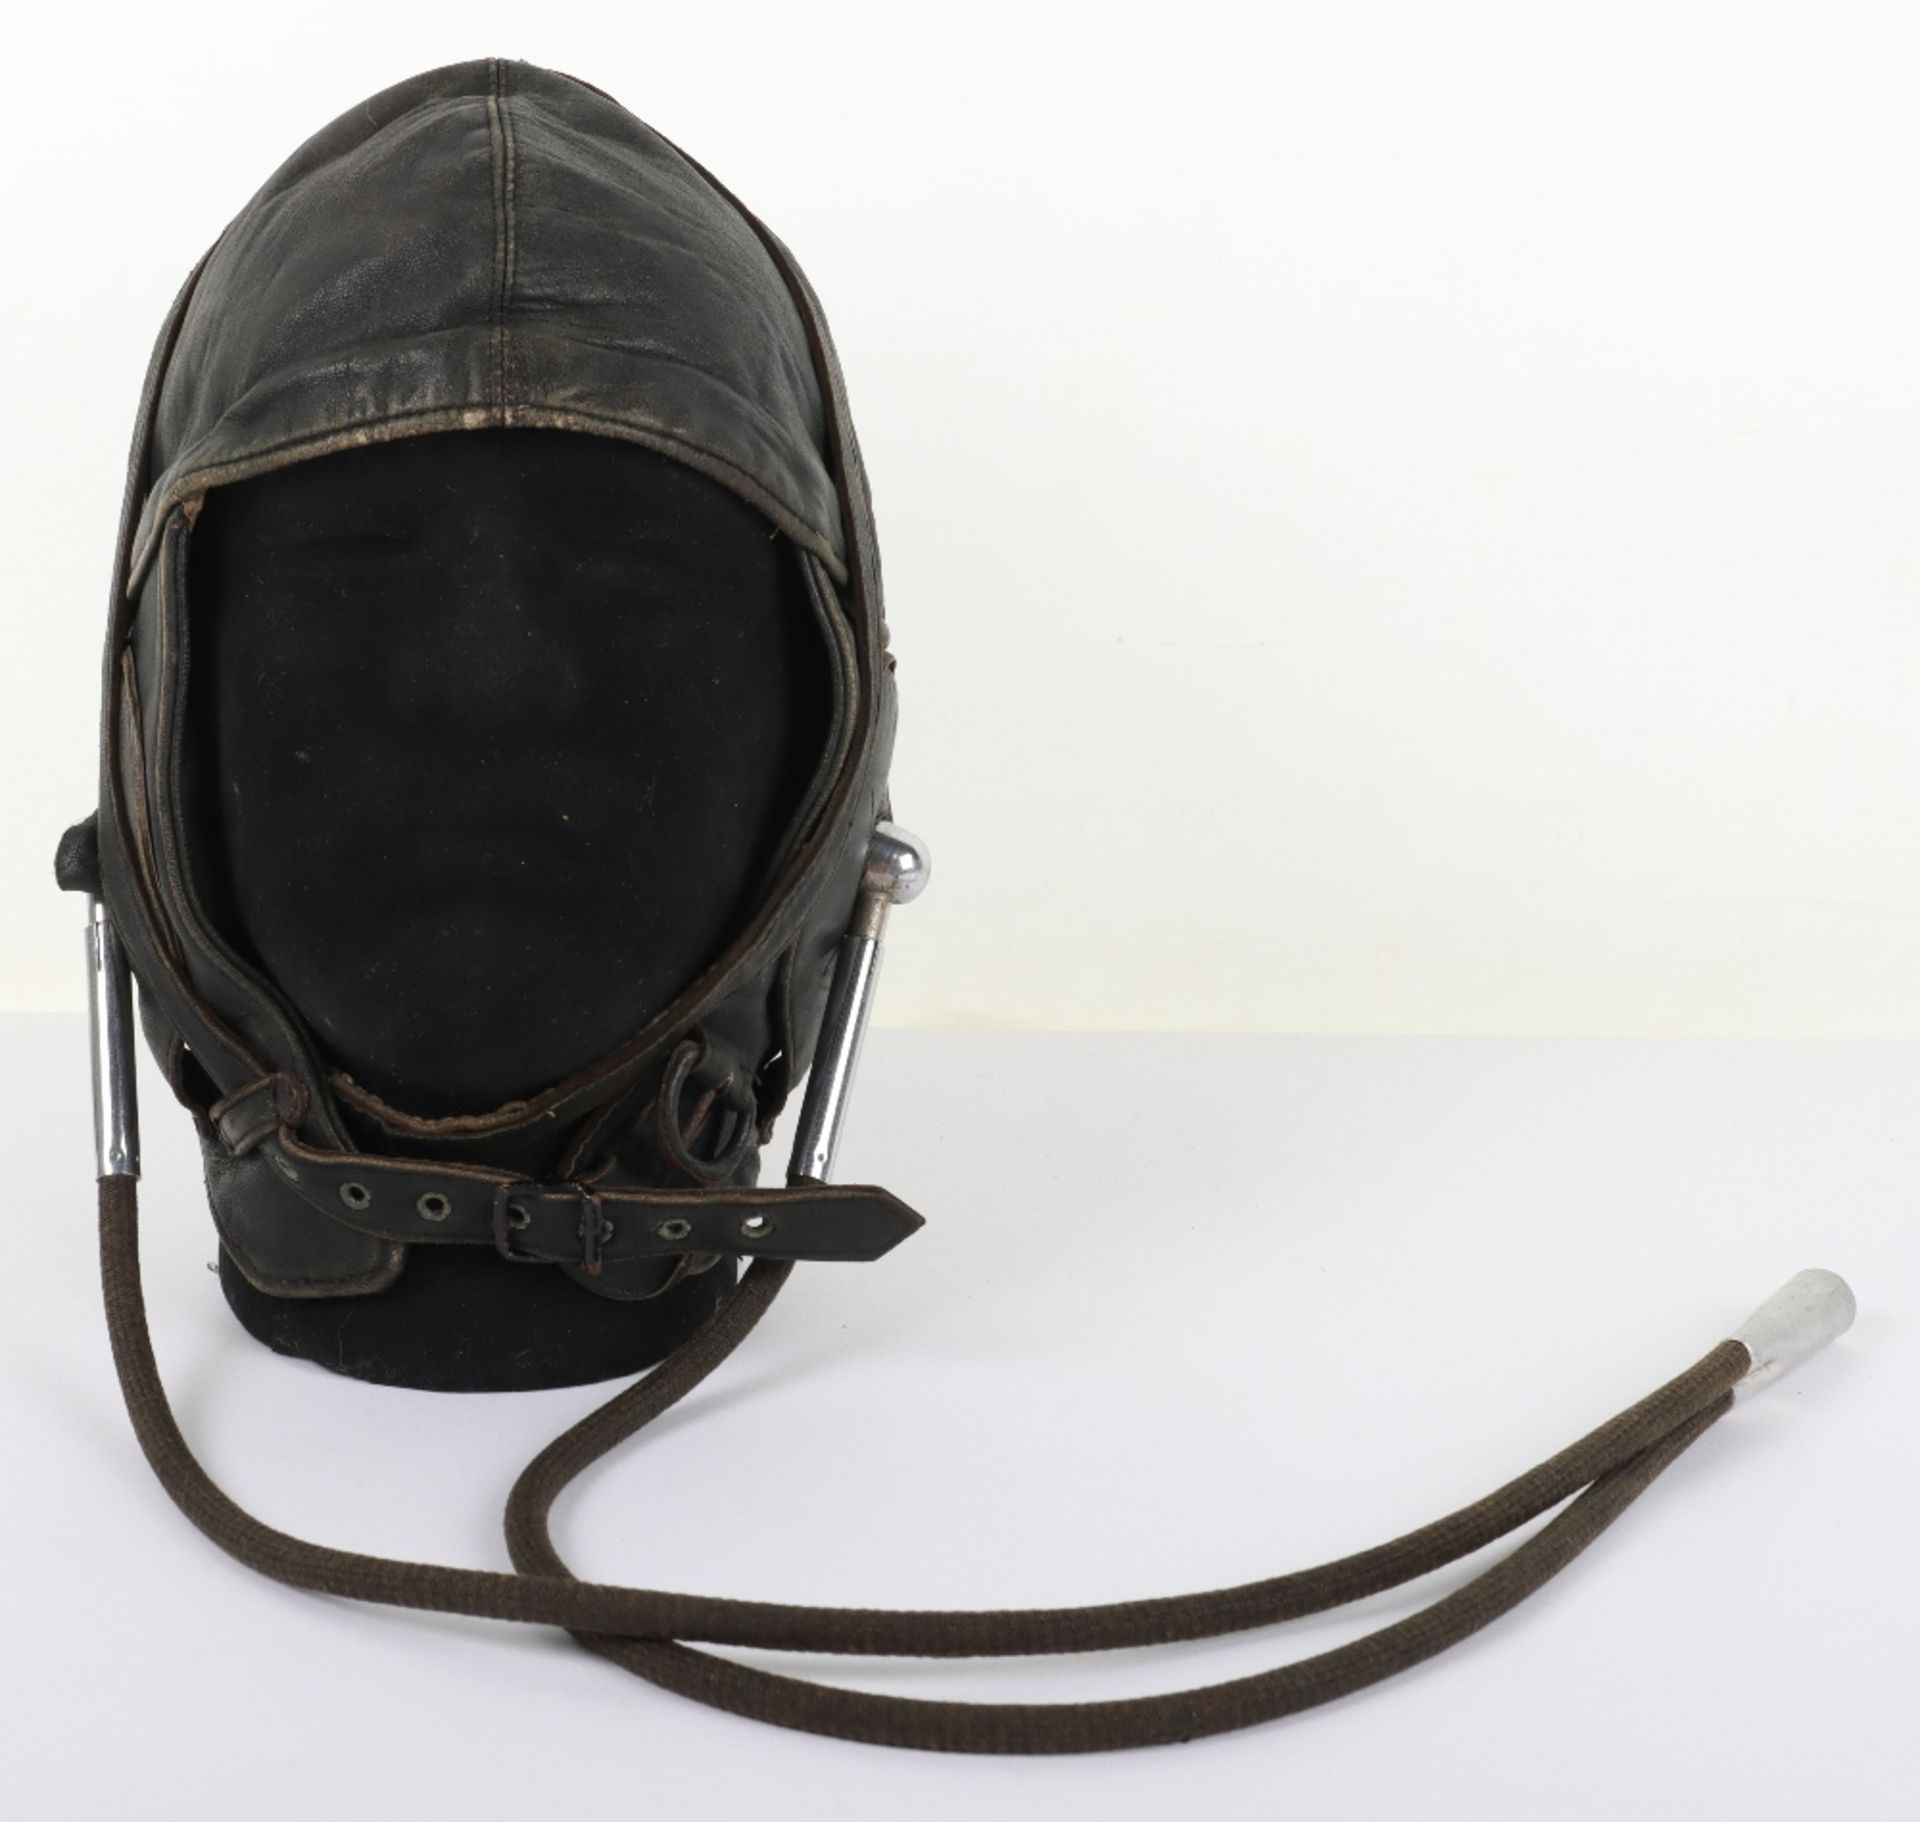 Early Lewis Style Black Leather Flight Helmet with Gosport Tubes - Image 8 of 8